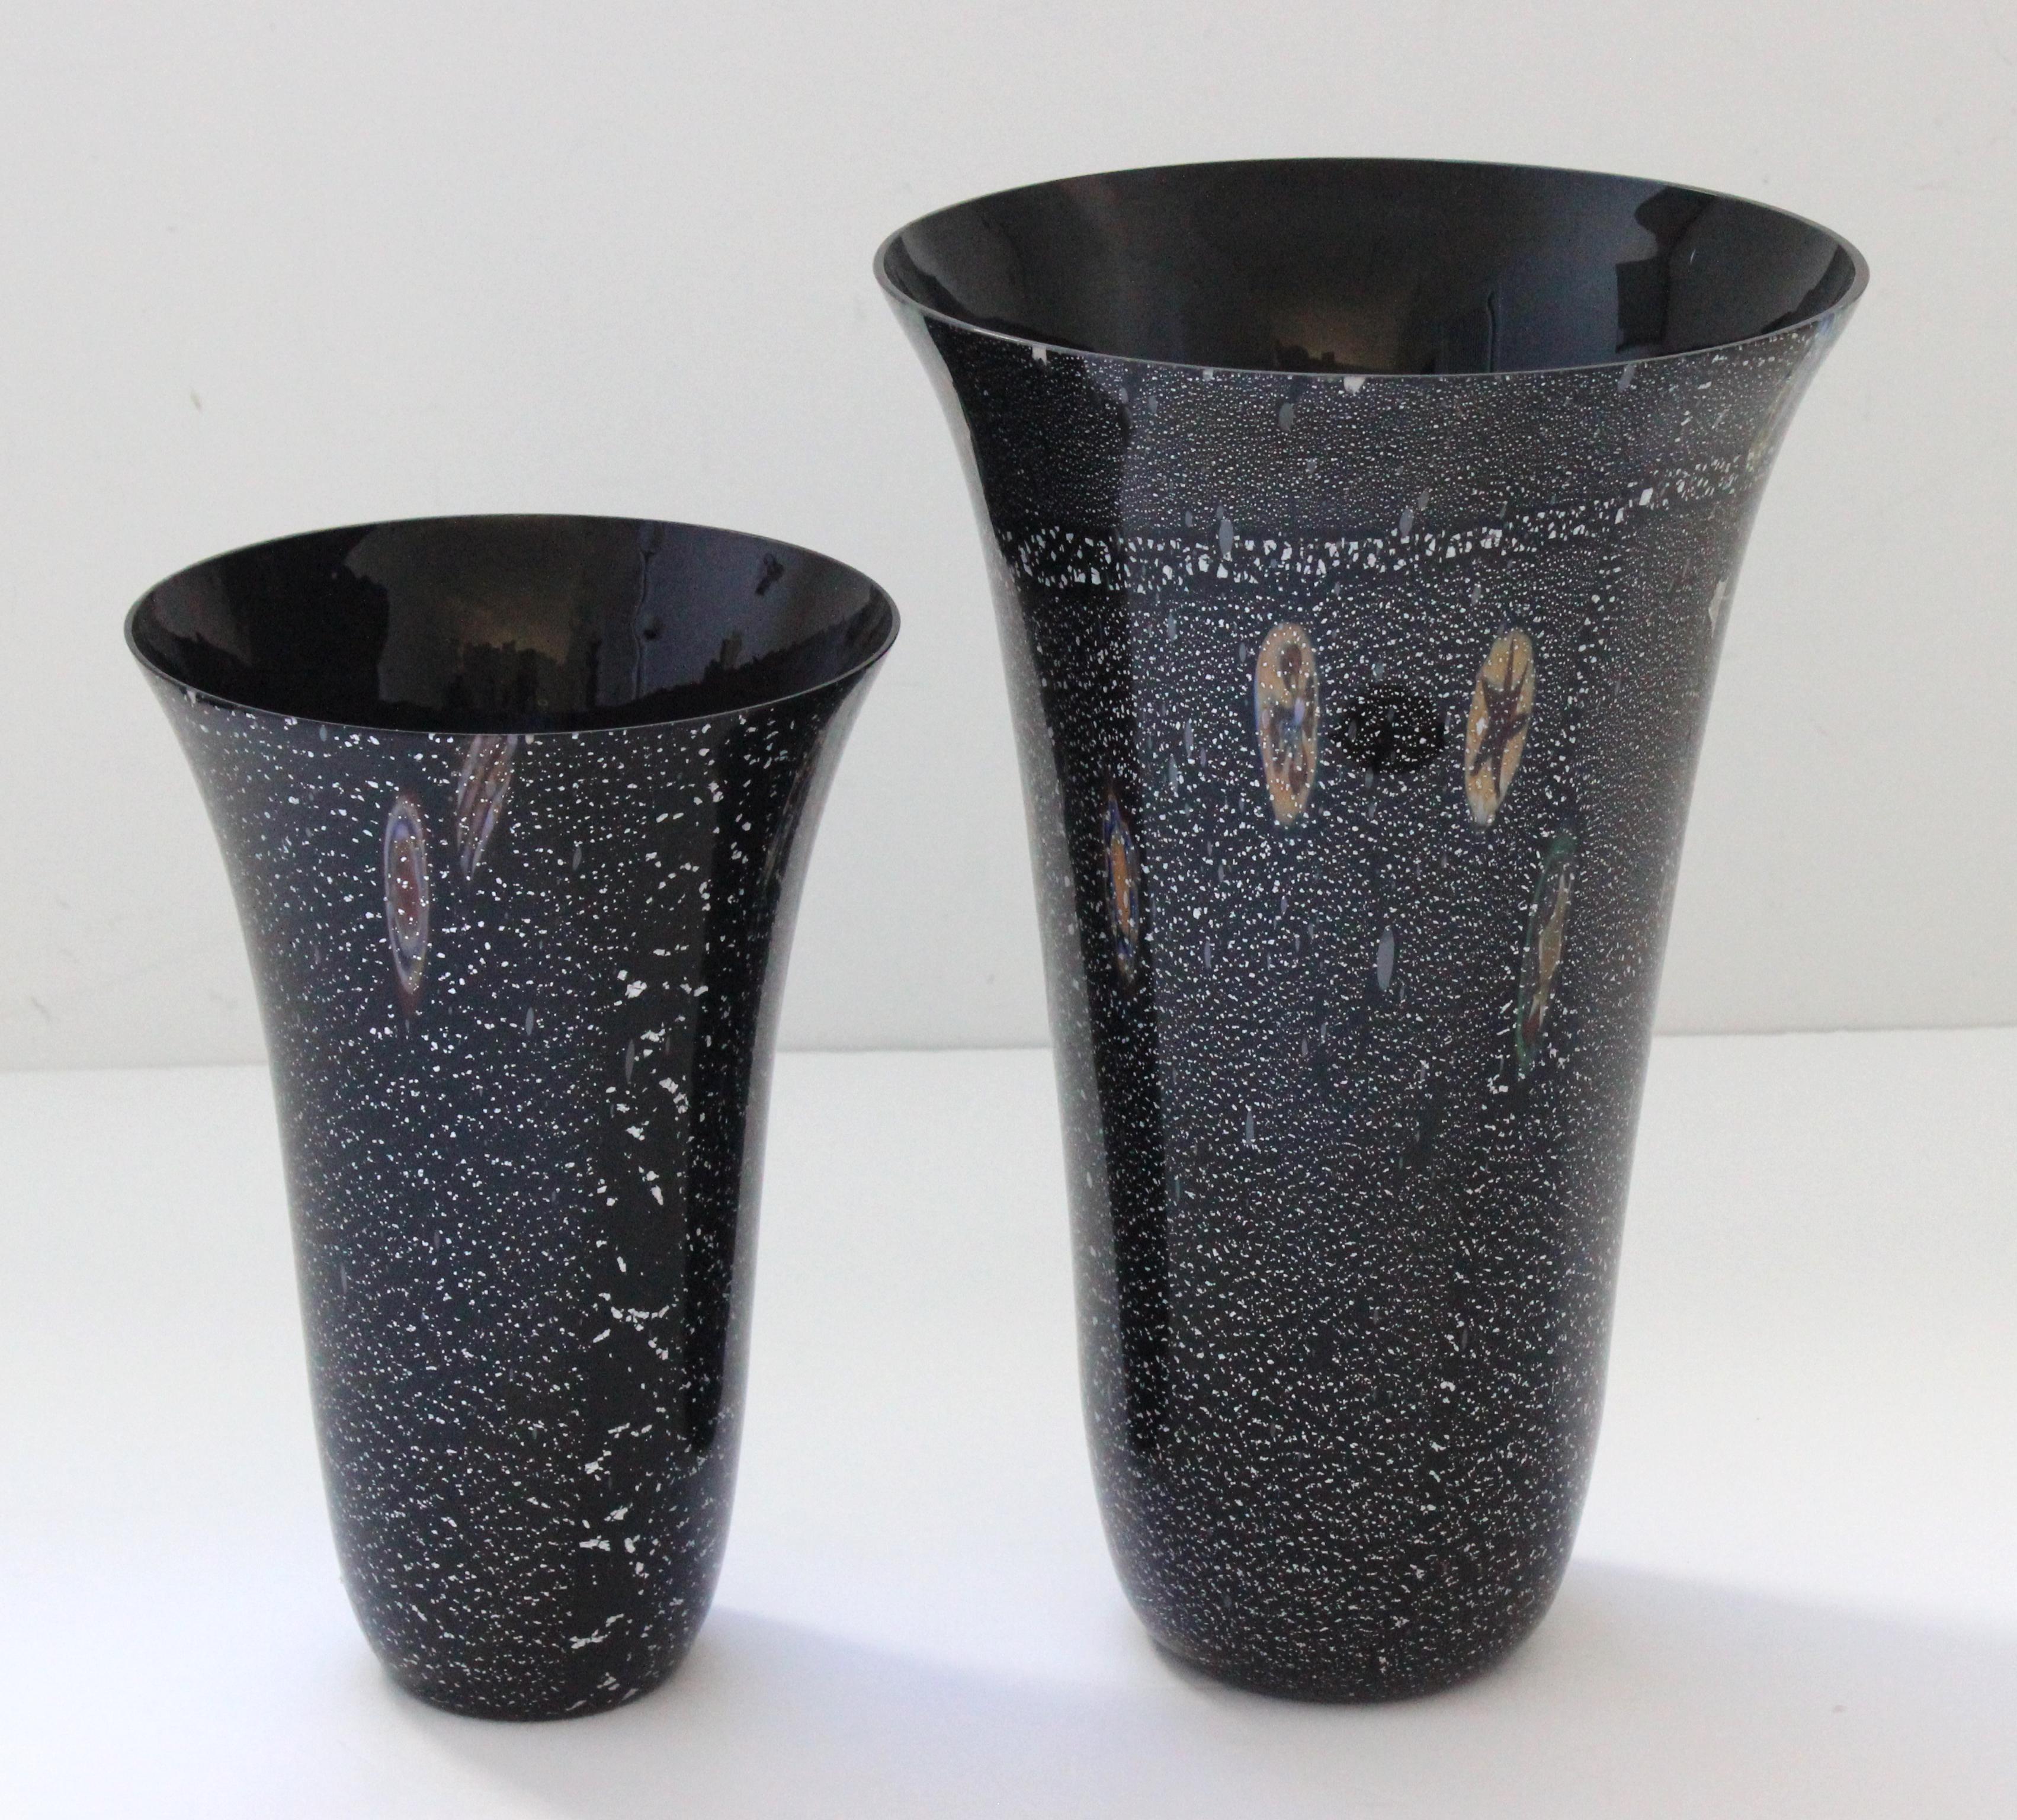 This stylish and chic set of Murano glass vases date to the 1980s and were created by Effetre.

Note: Dimensions of one vase are 13.63 height x 9